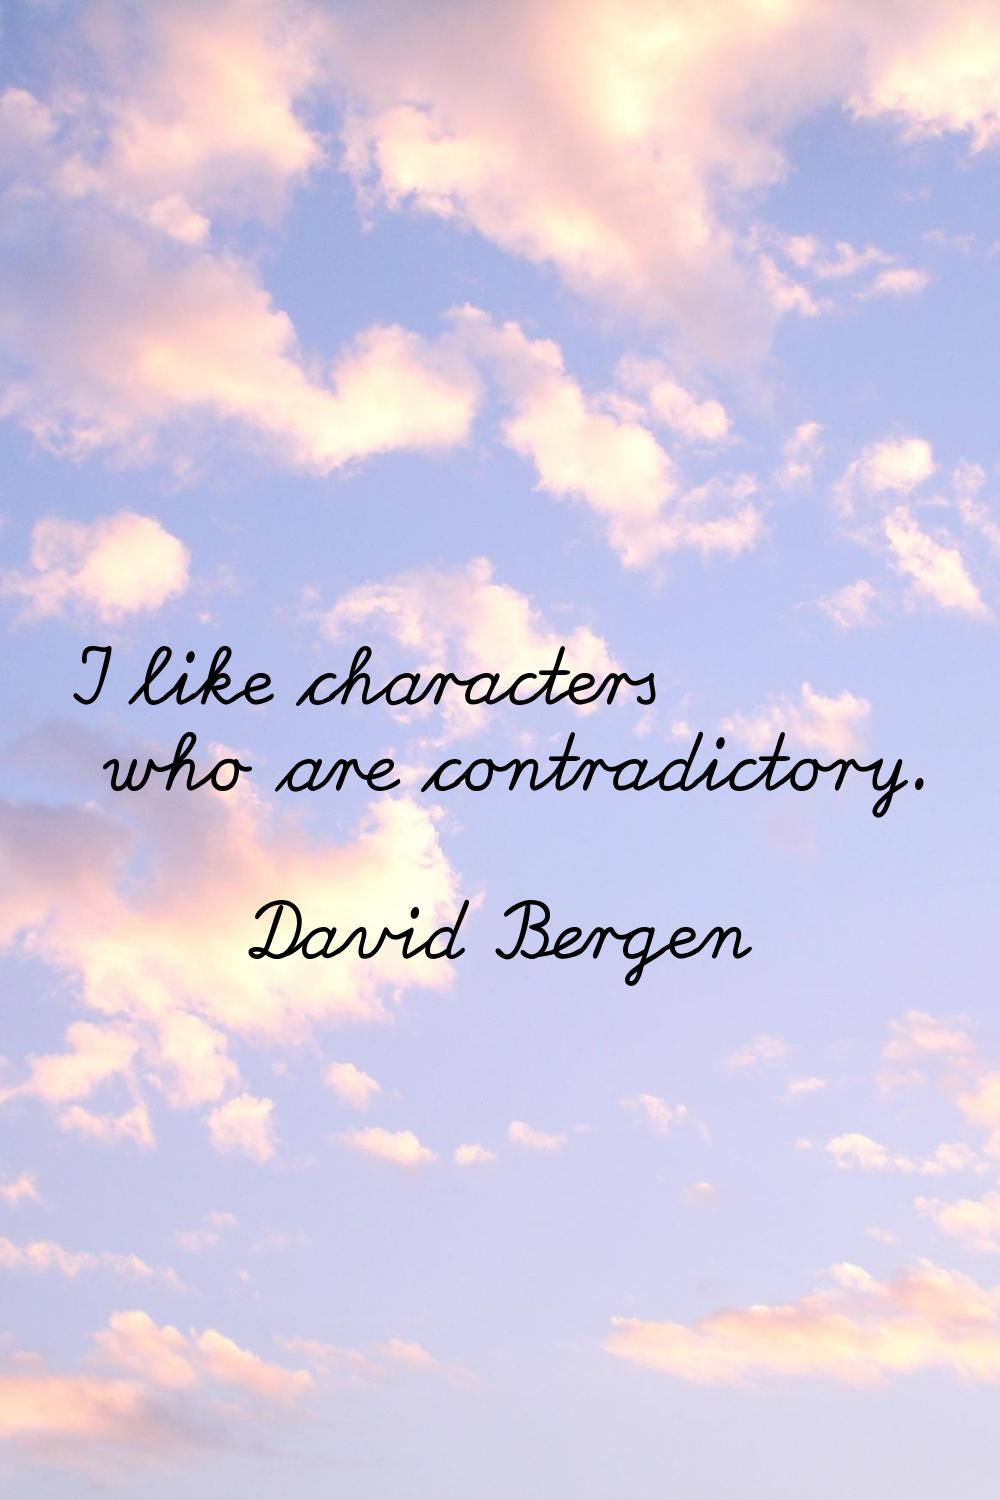 I like characters who are contradictory.